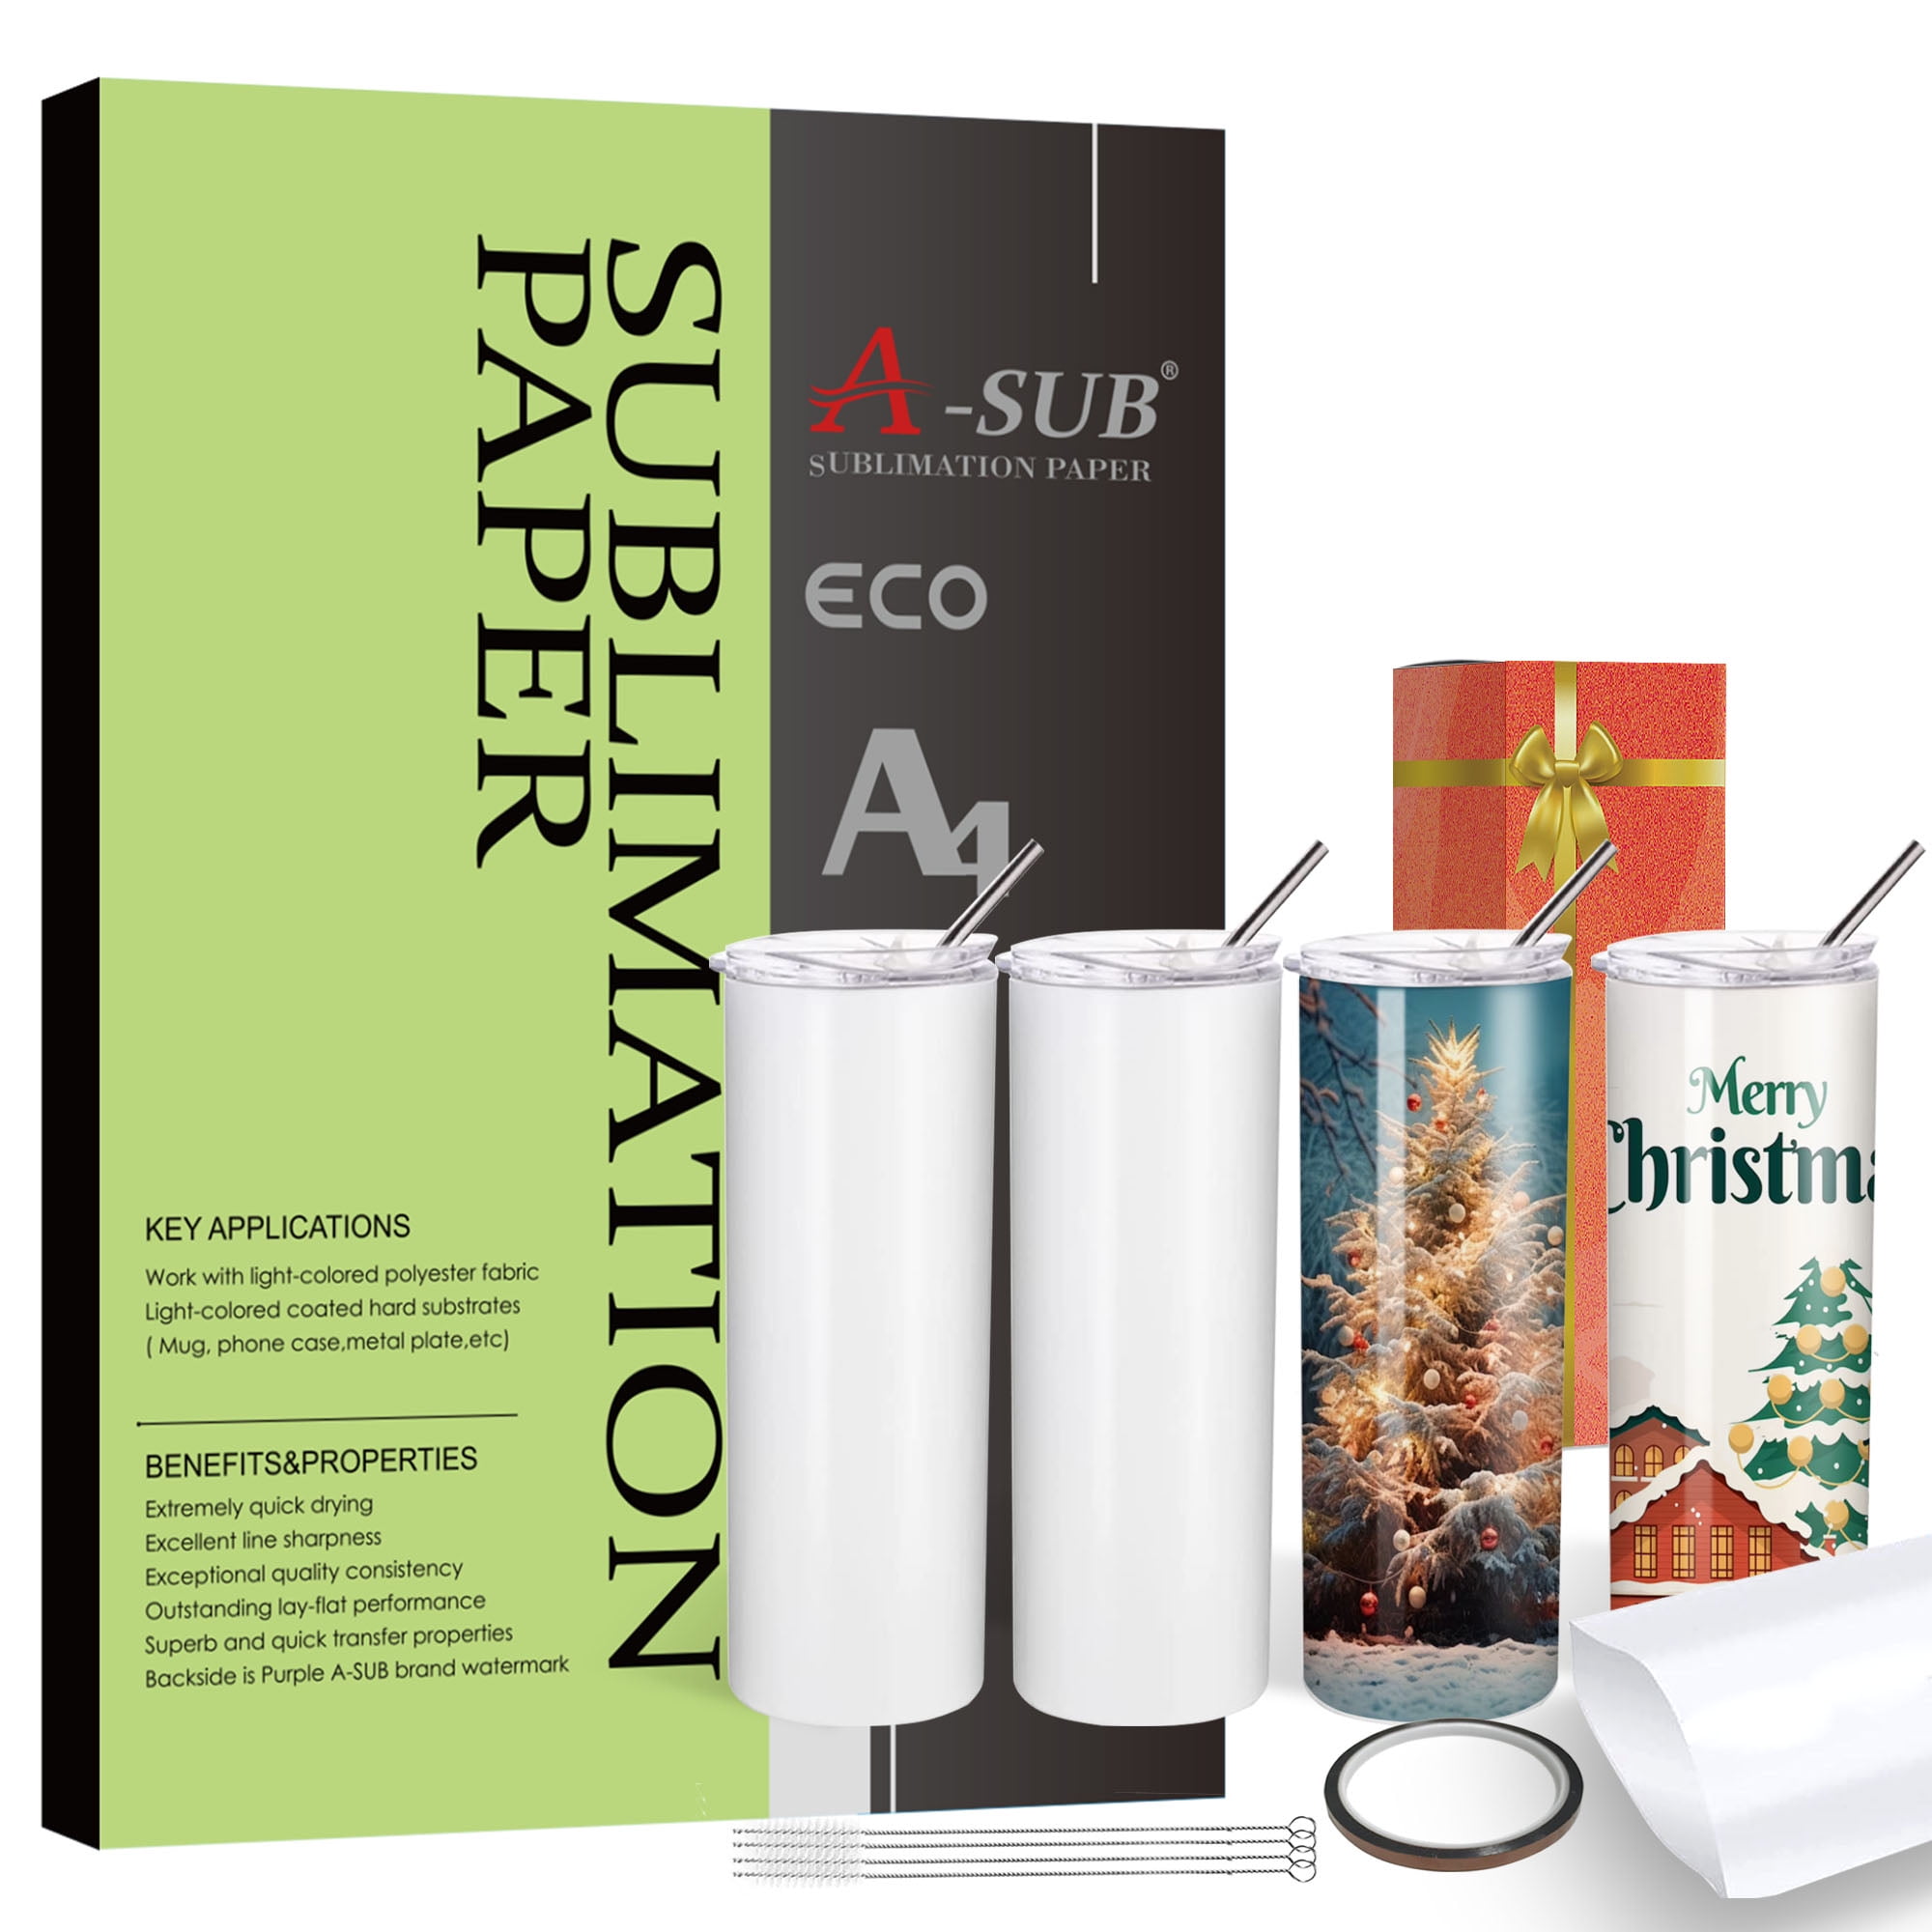  A-SUB Sublimation Paper 125g and Sublimation Ink Bundle Set :  Office Products